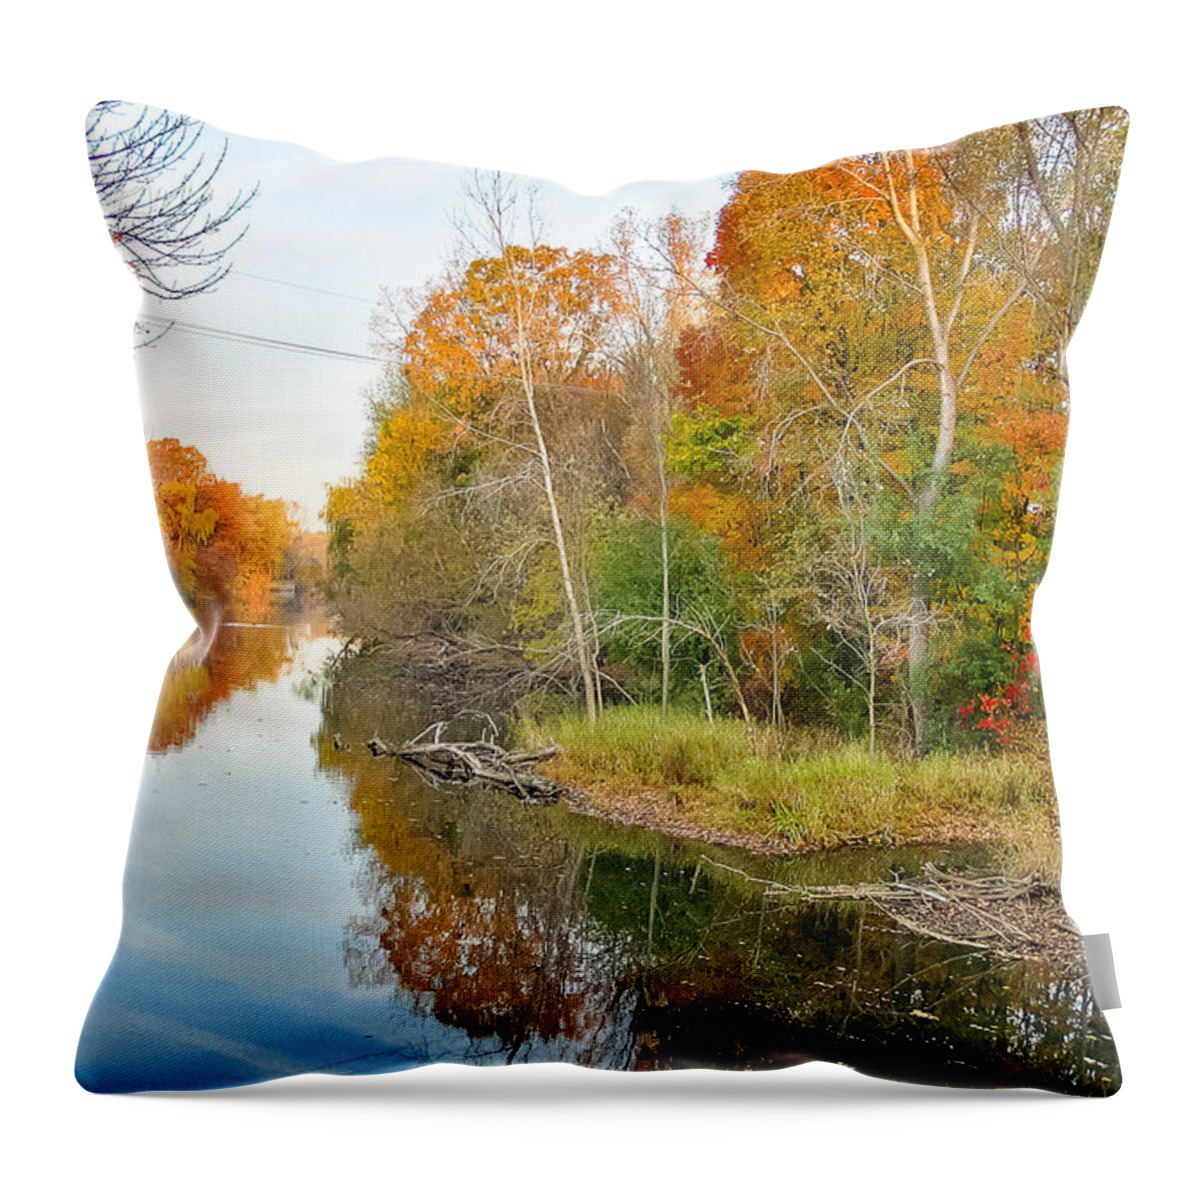 Michigan Throw Pillow featuring the photograph Red Cedar Fall Colors by Lars Lentz